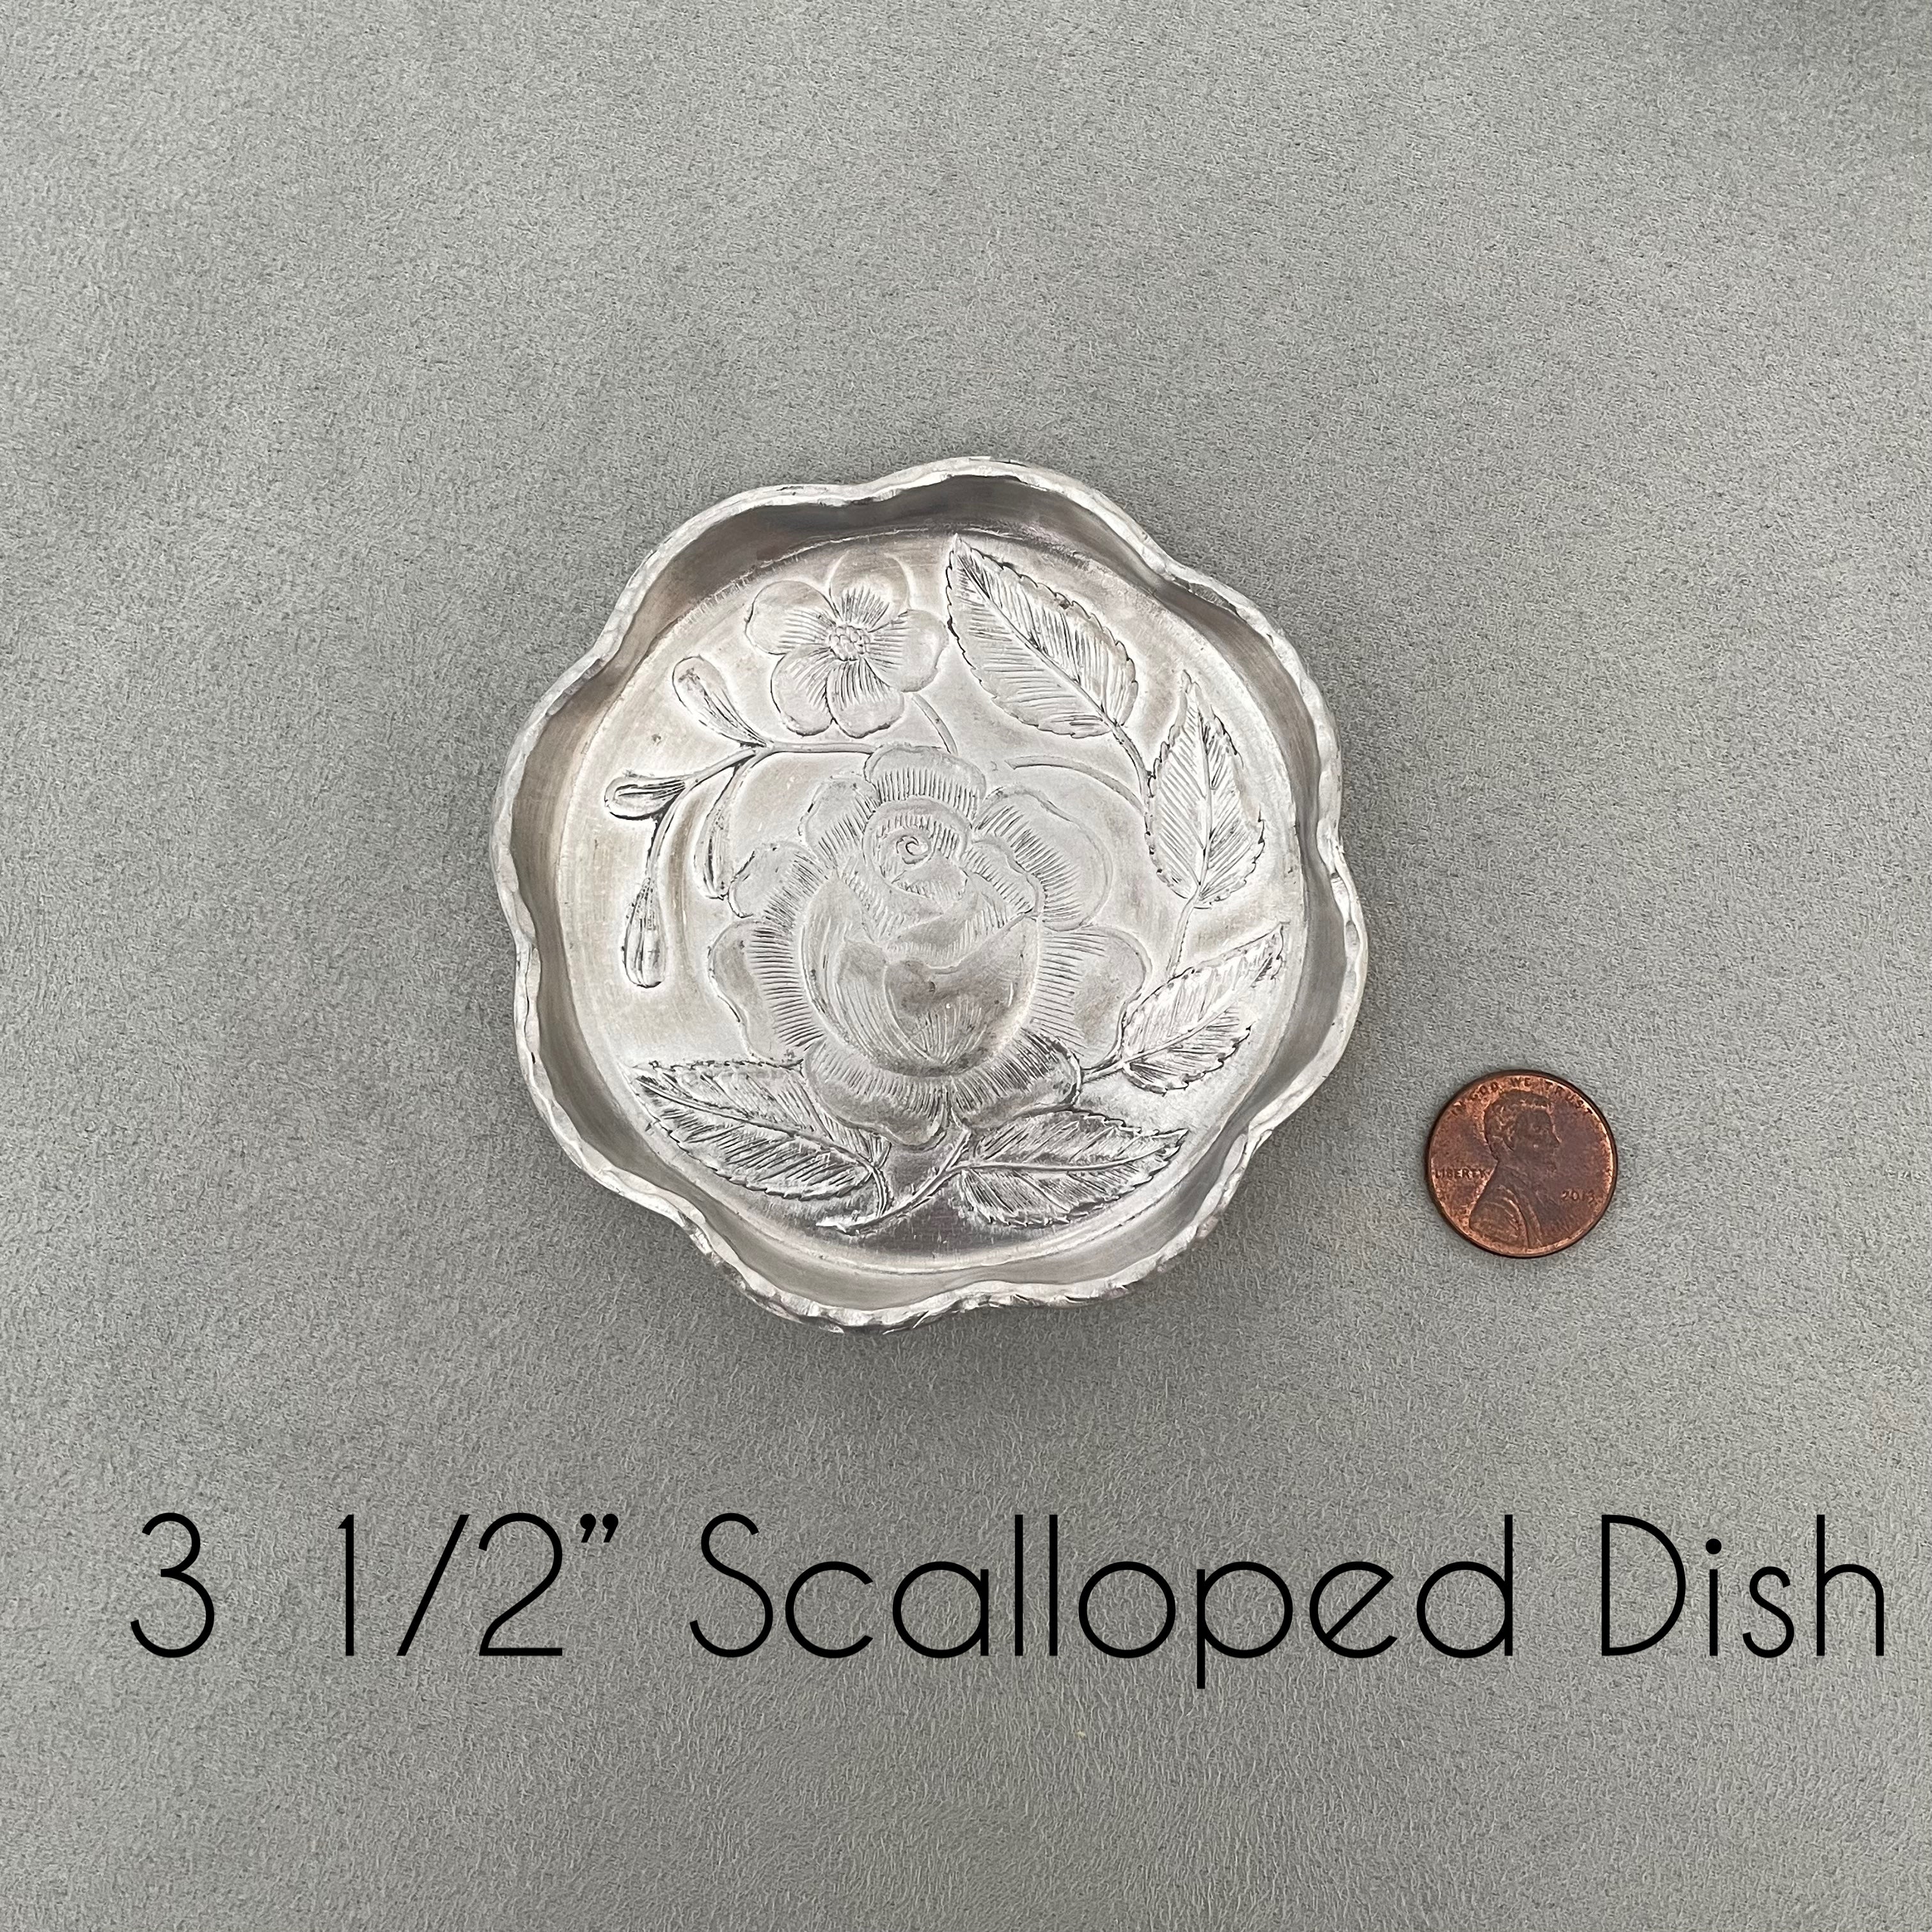 3 1/2 inch scalloped sliver dish with penny beside for size reference - Flat lay props from Champagne & GRIT